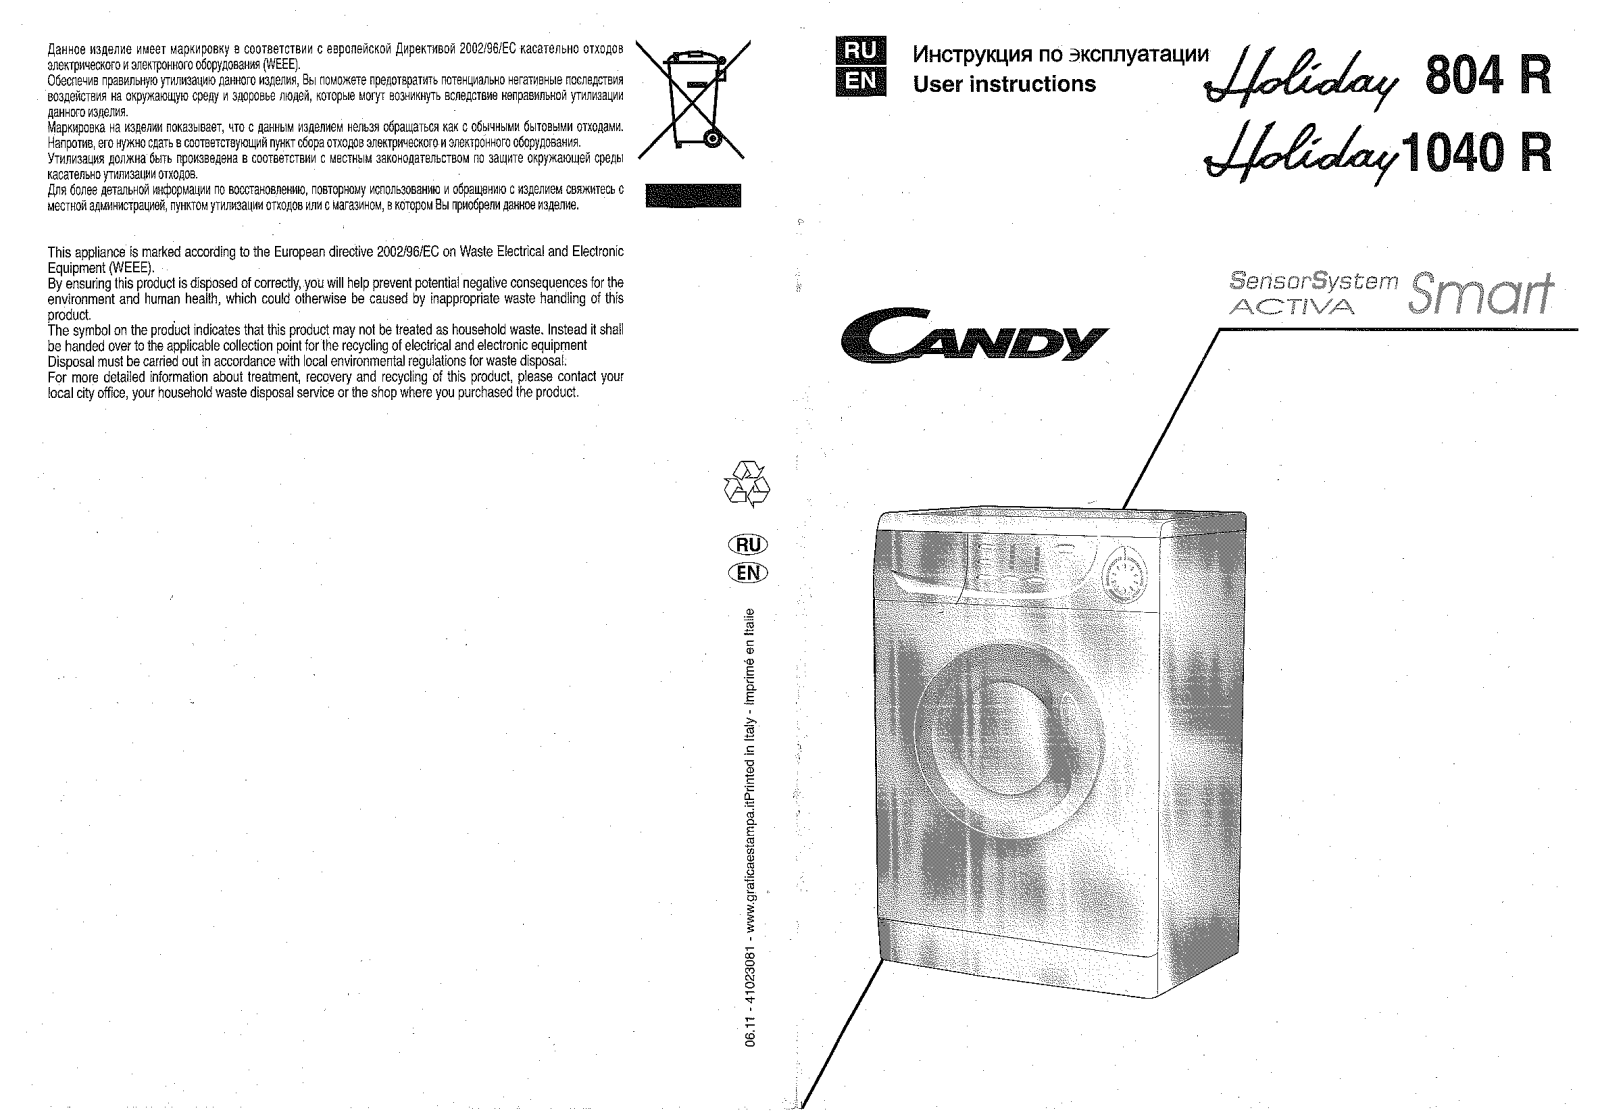 Candy HOLIDAY 804 R User Manual